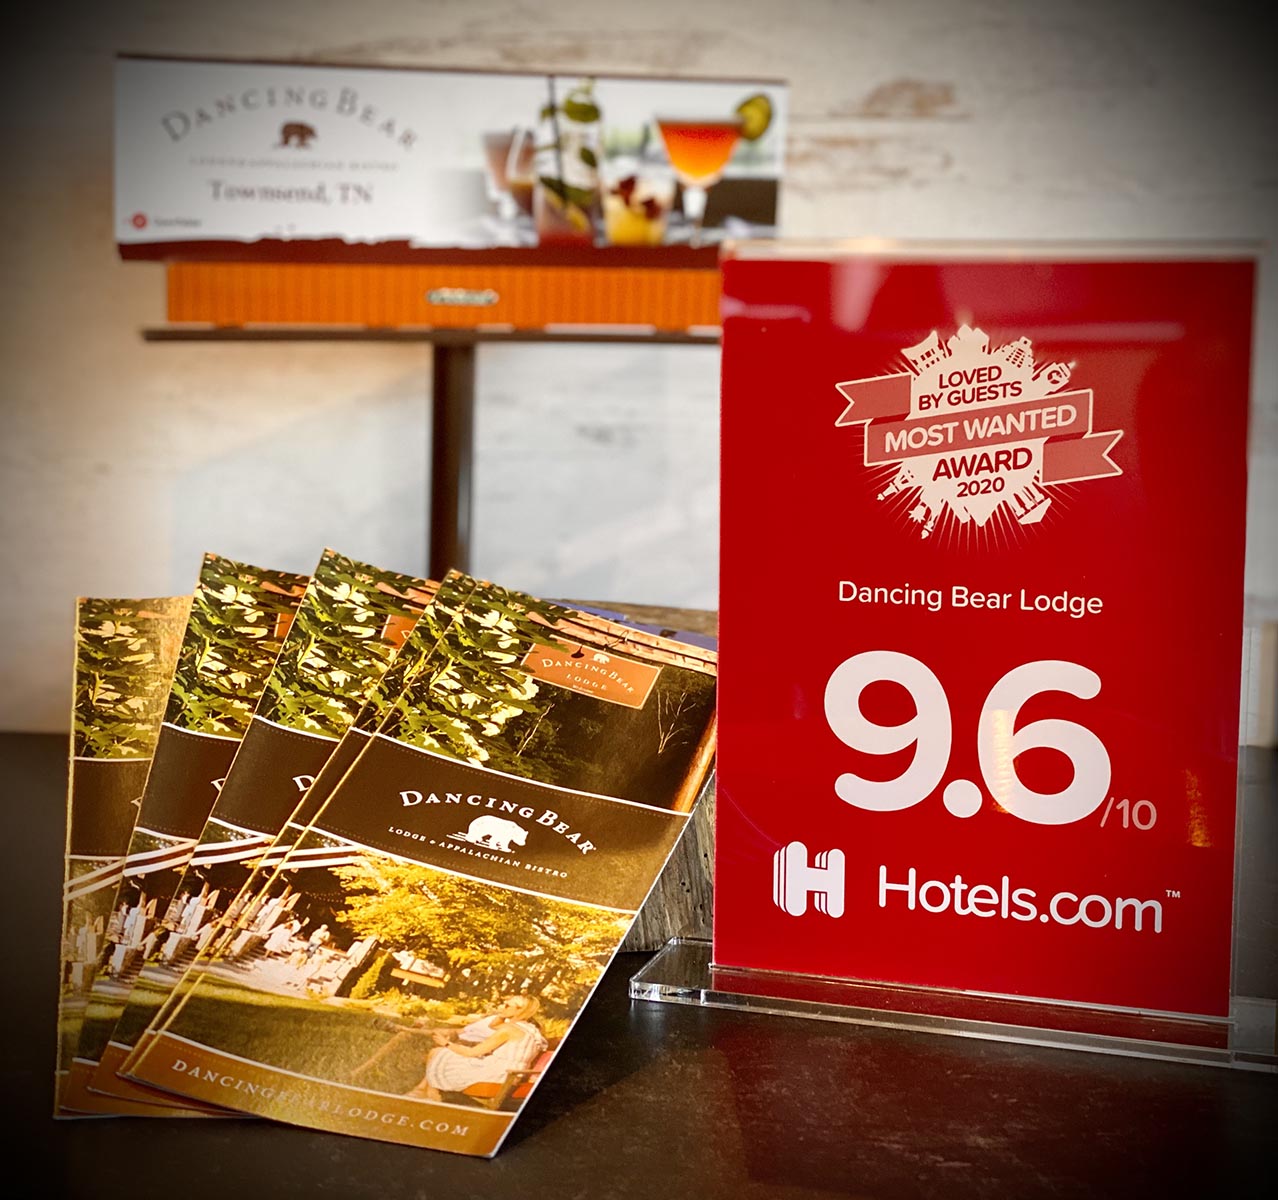 9.6 / 10 Hotels.com Loved By Guests Award 2020